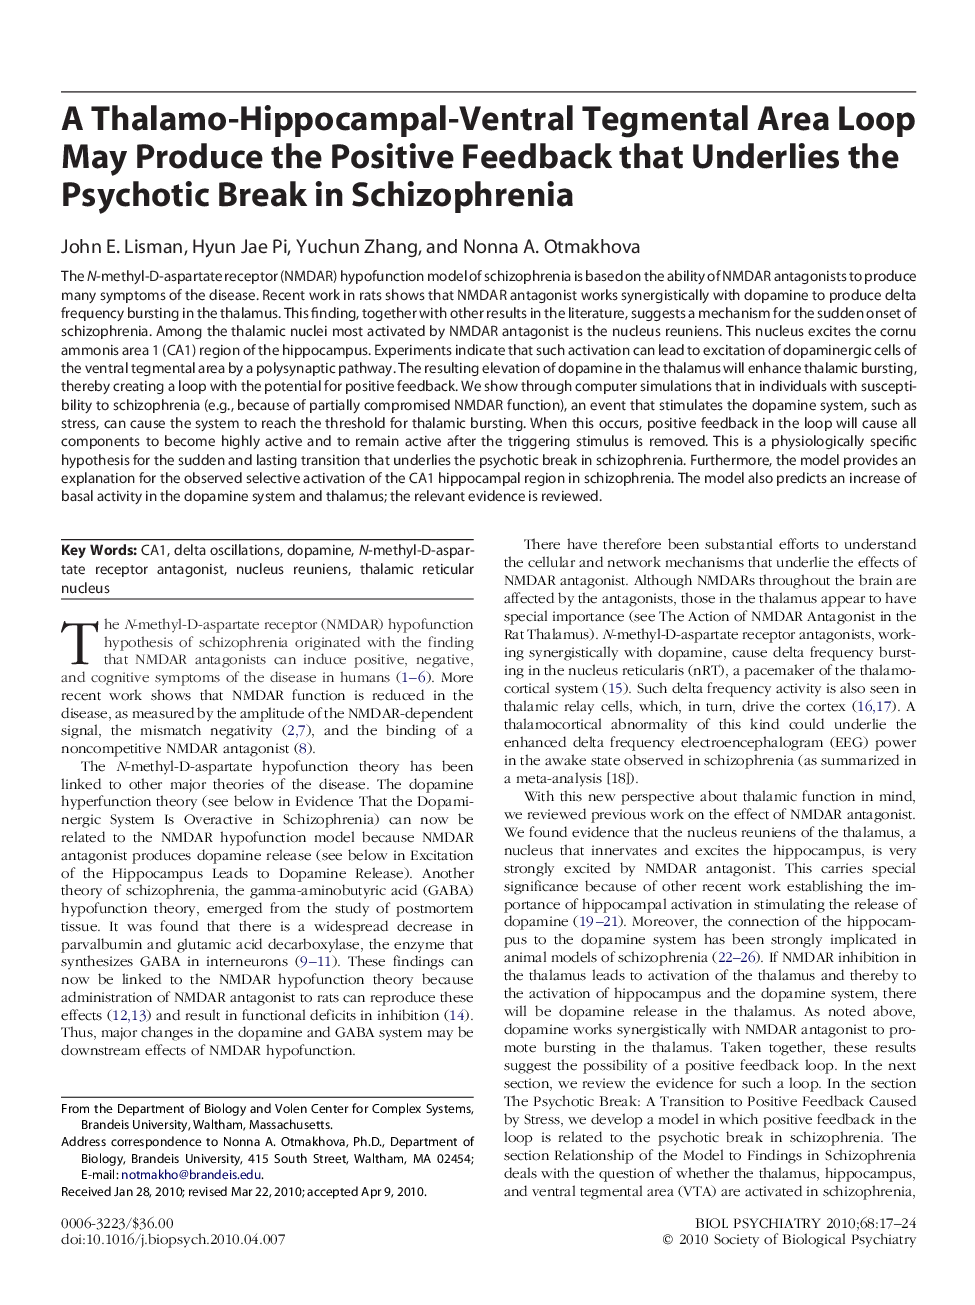 A Thalamo-Hippocampal-Ventral Tegmental Area Loop May Produce the Positive Feedback that Underlies the Psychotic Break in Schizophrenia